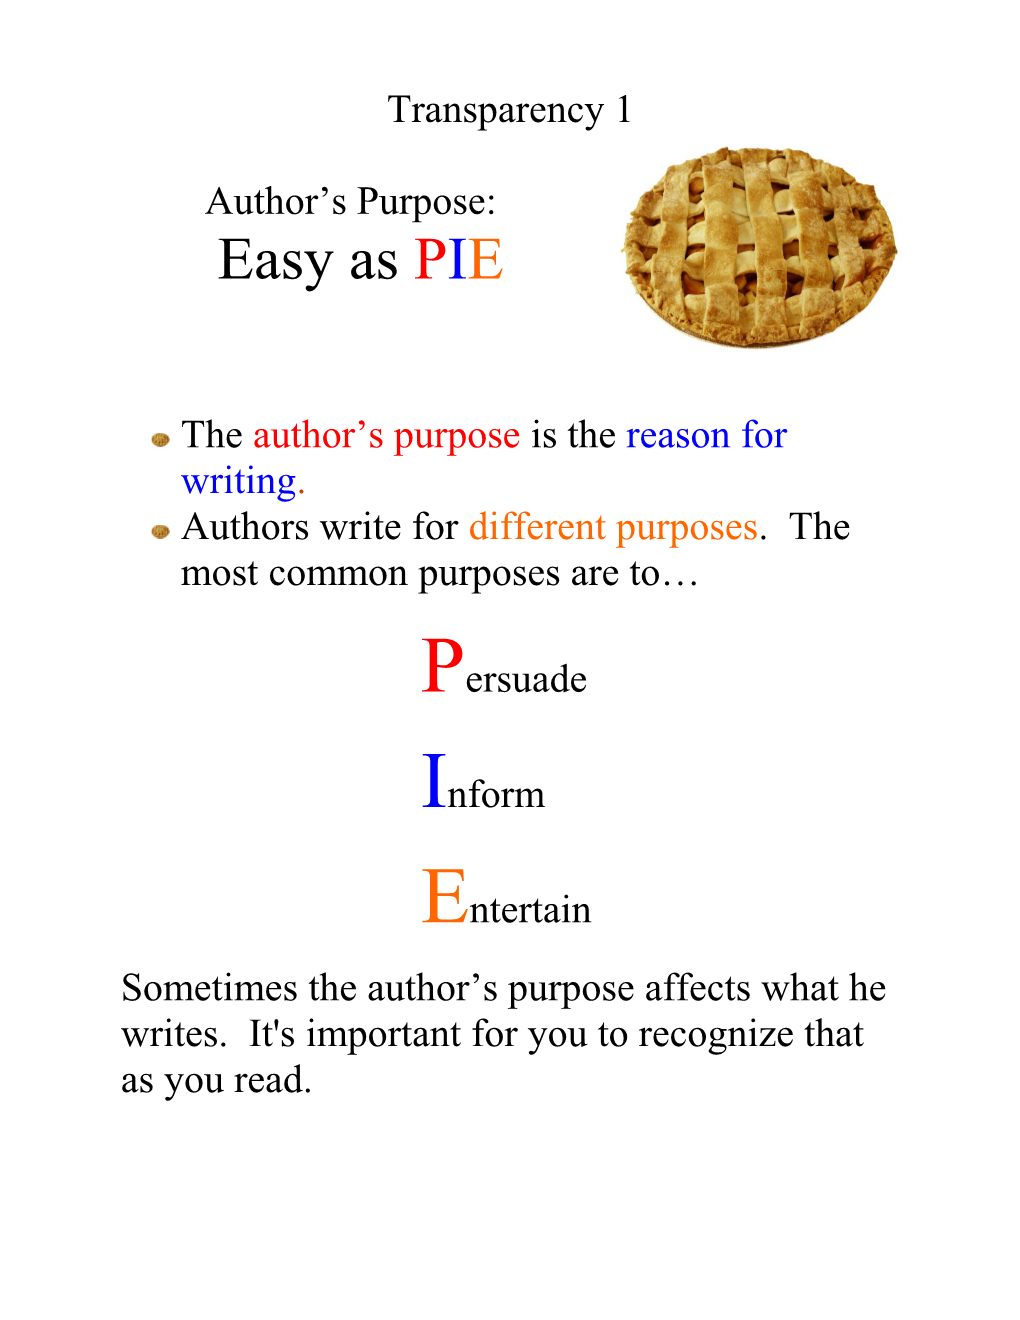 Author's Purpose Questions Are Questions That Ask You to Figure out Why the Author Wrote